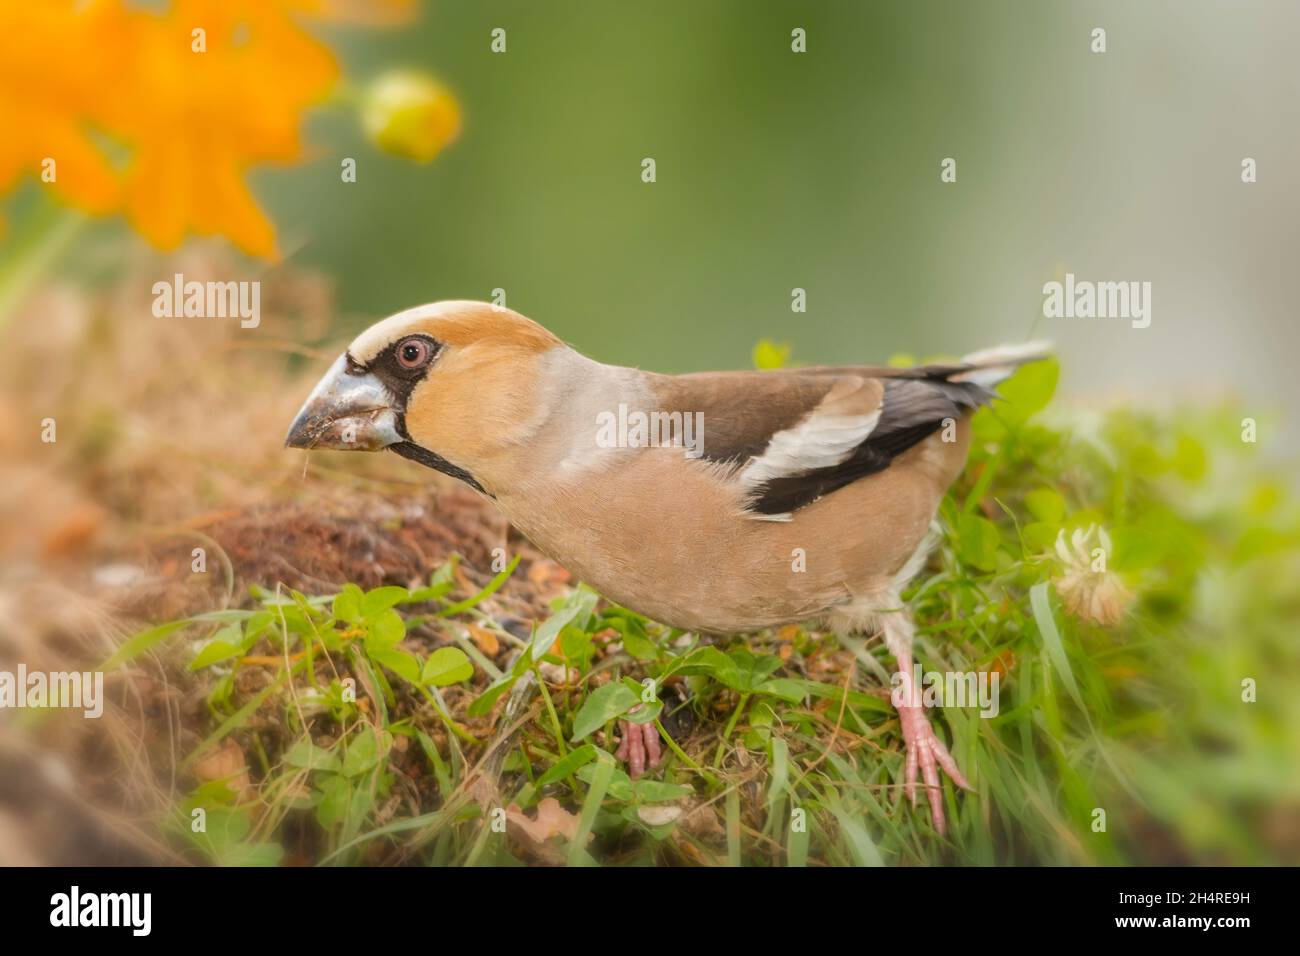 hawfinch between grass and flowers Stock Photo